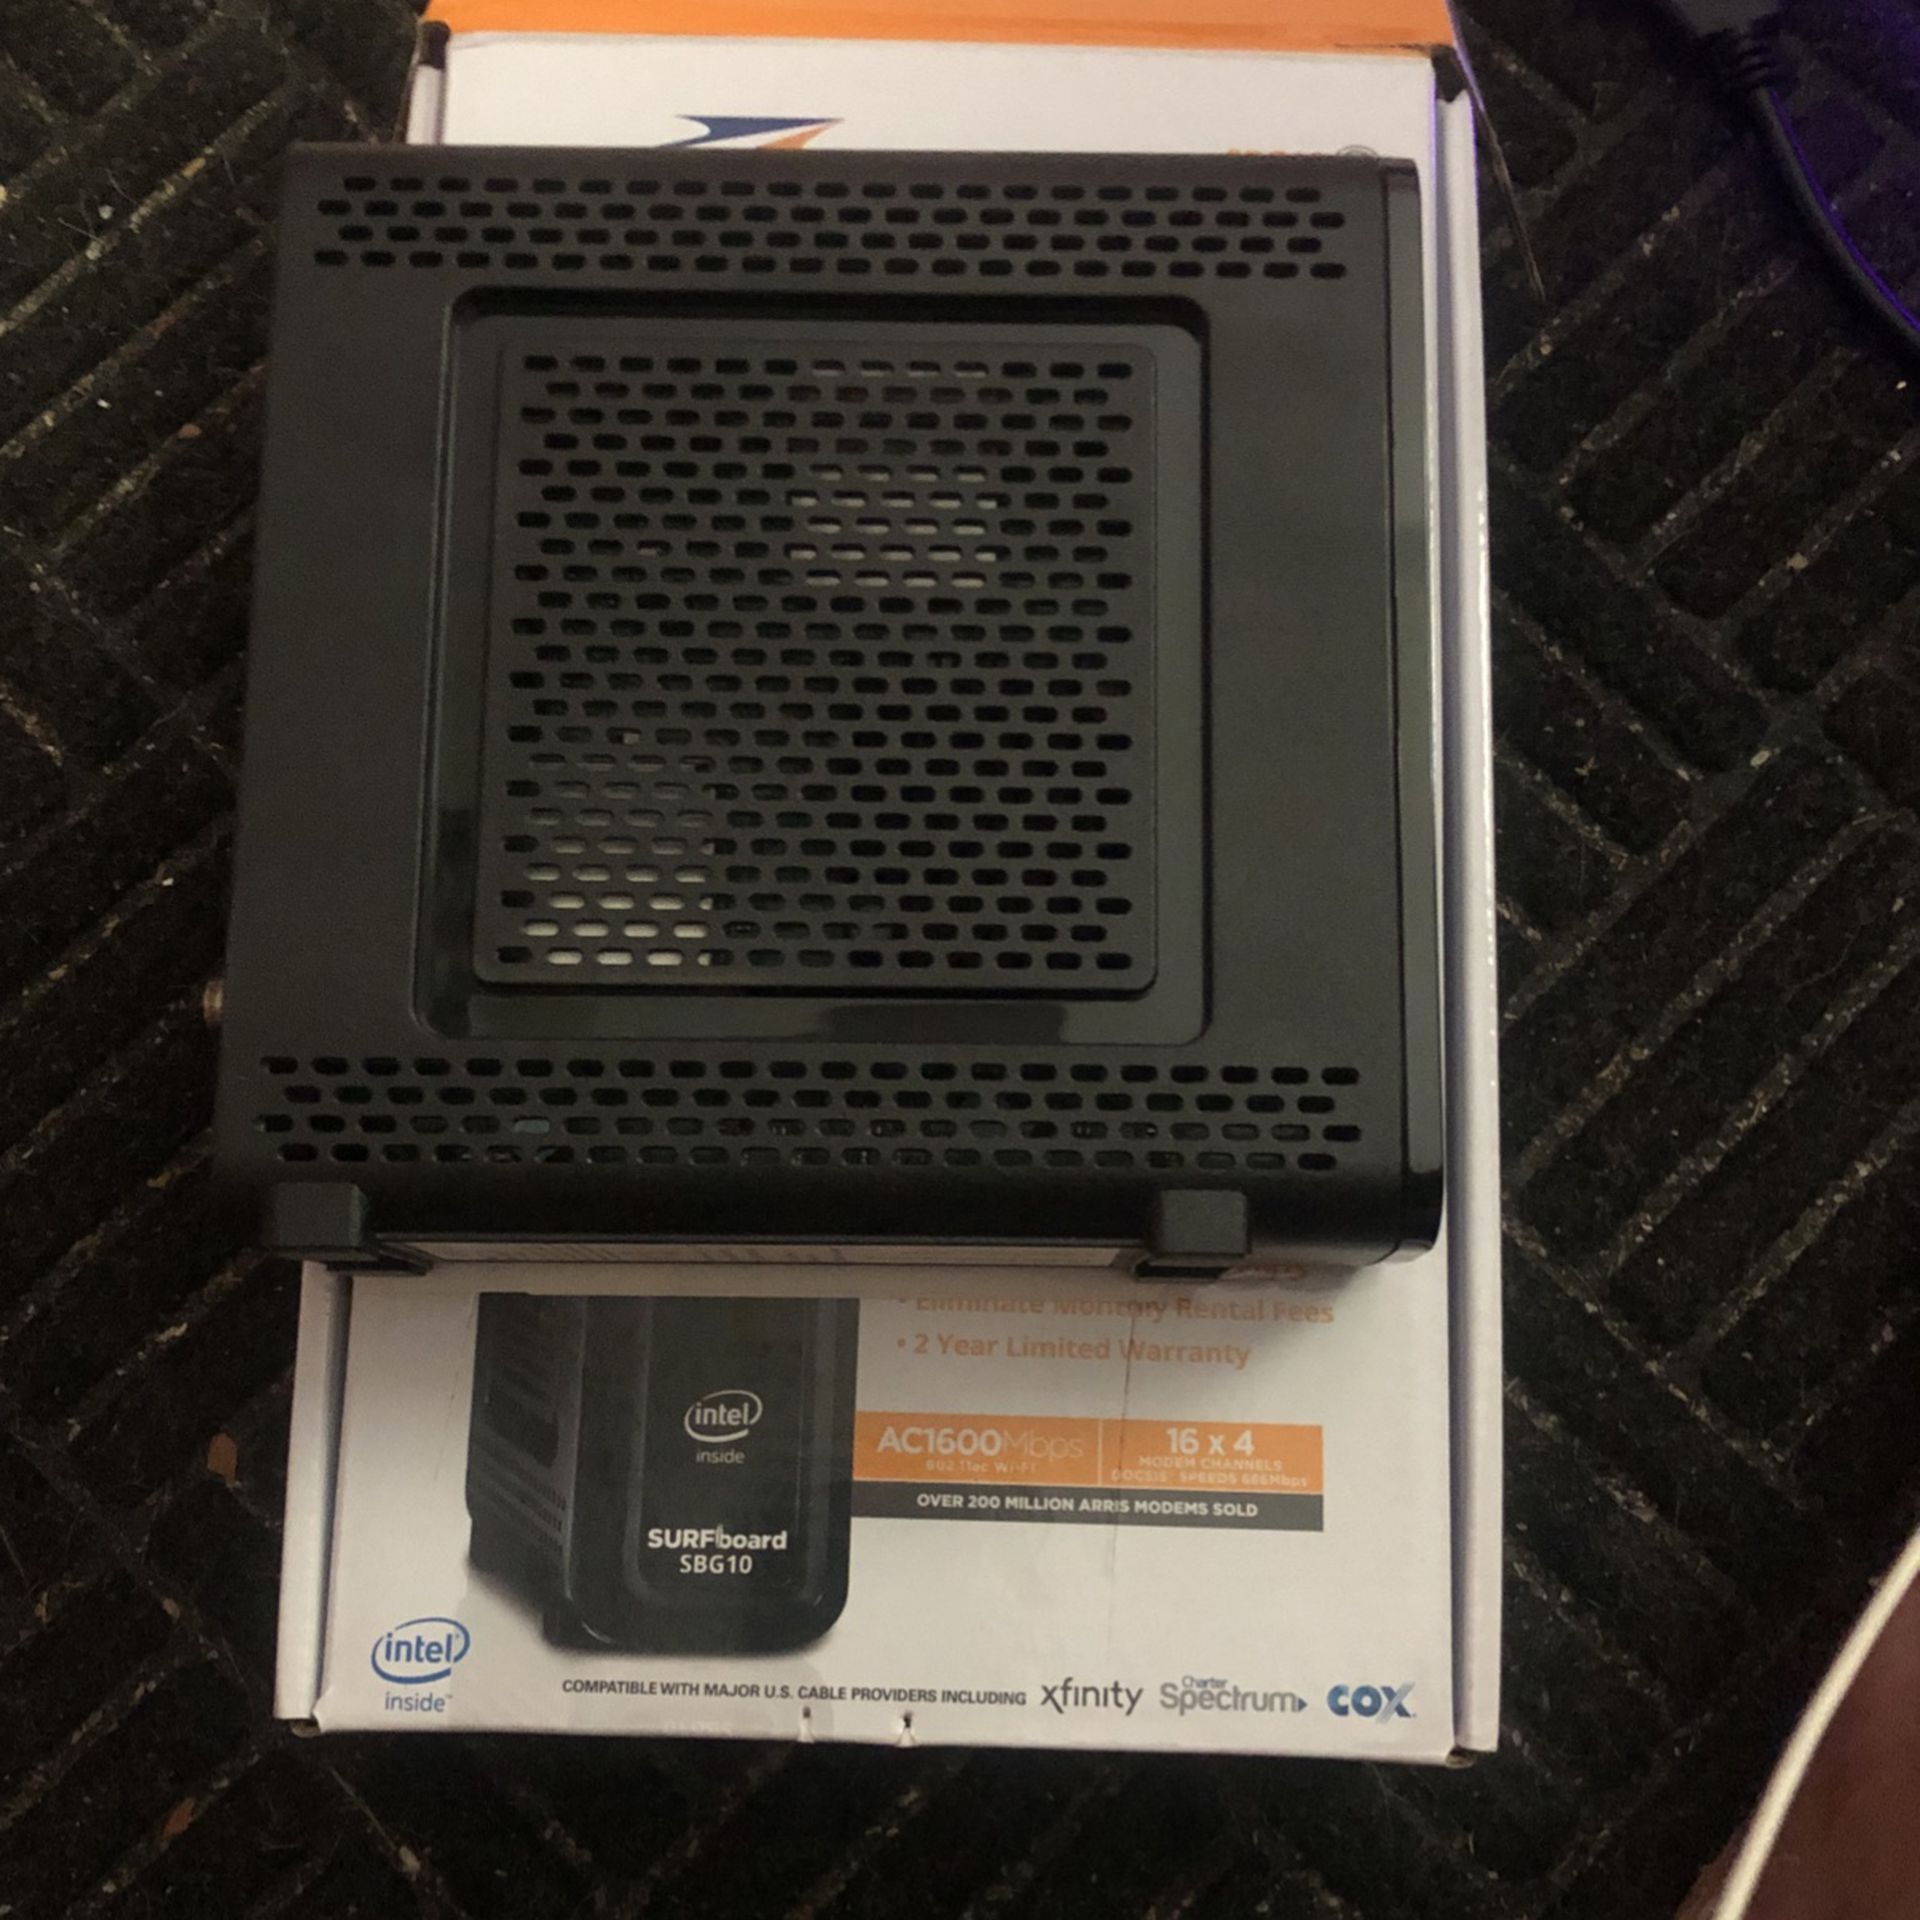 Aries SBG10 Cable Modem For Comcast High Speed Internet 